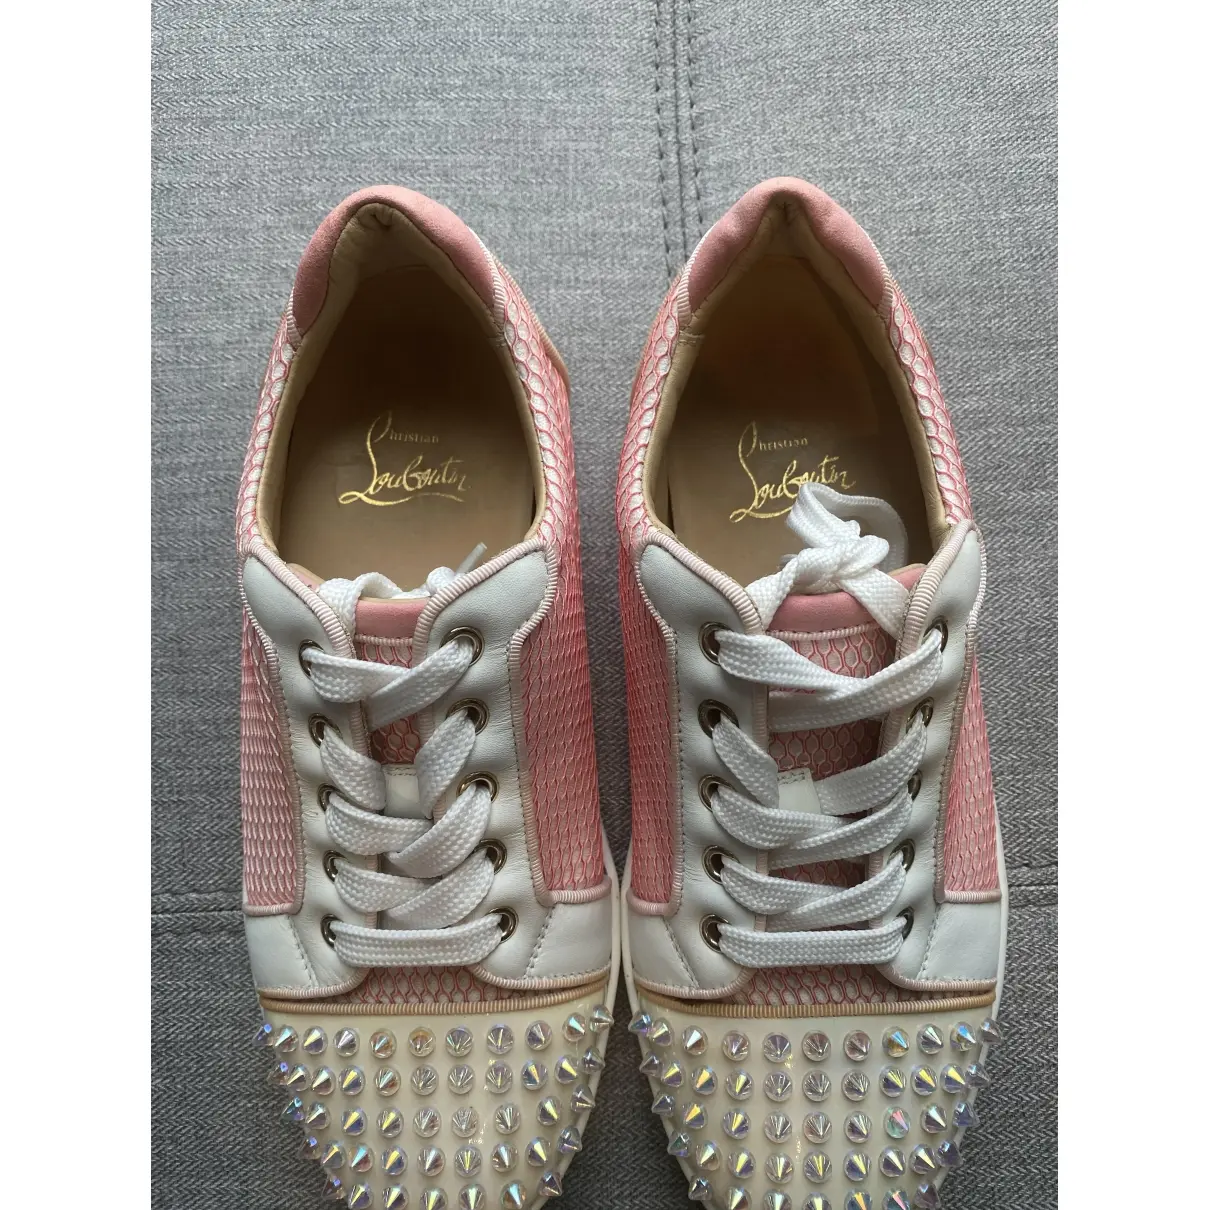 Christian Louboutin Gondolita leather trainers for sale